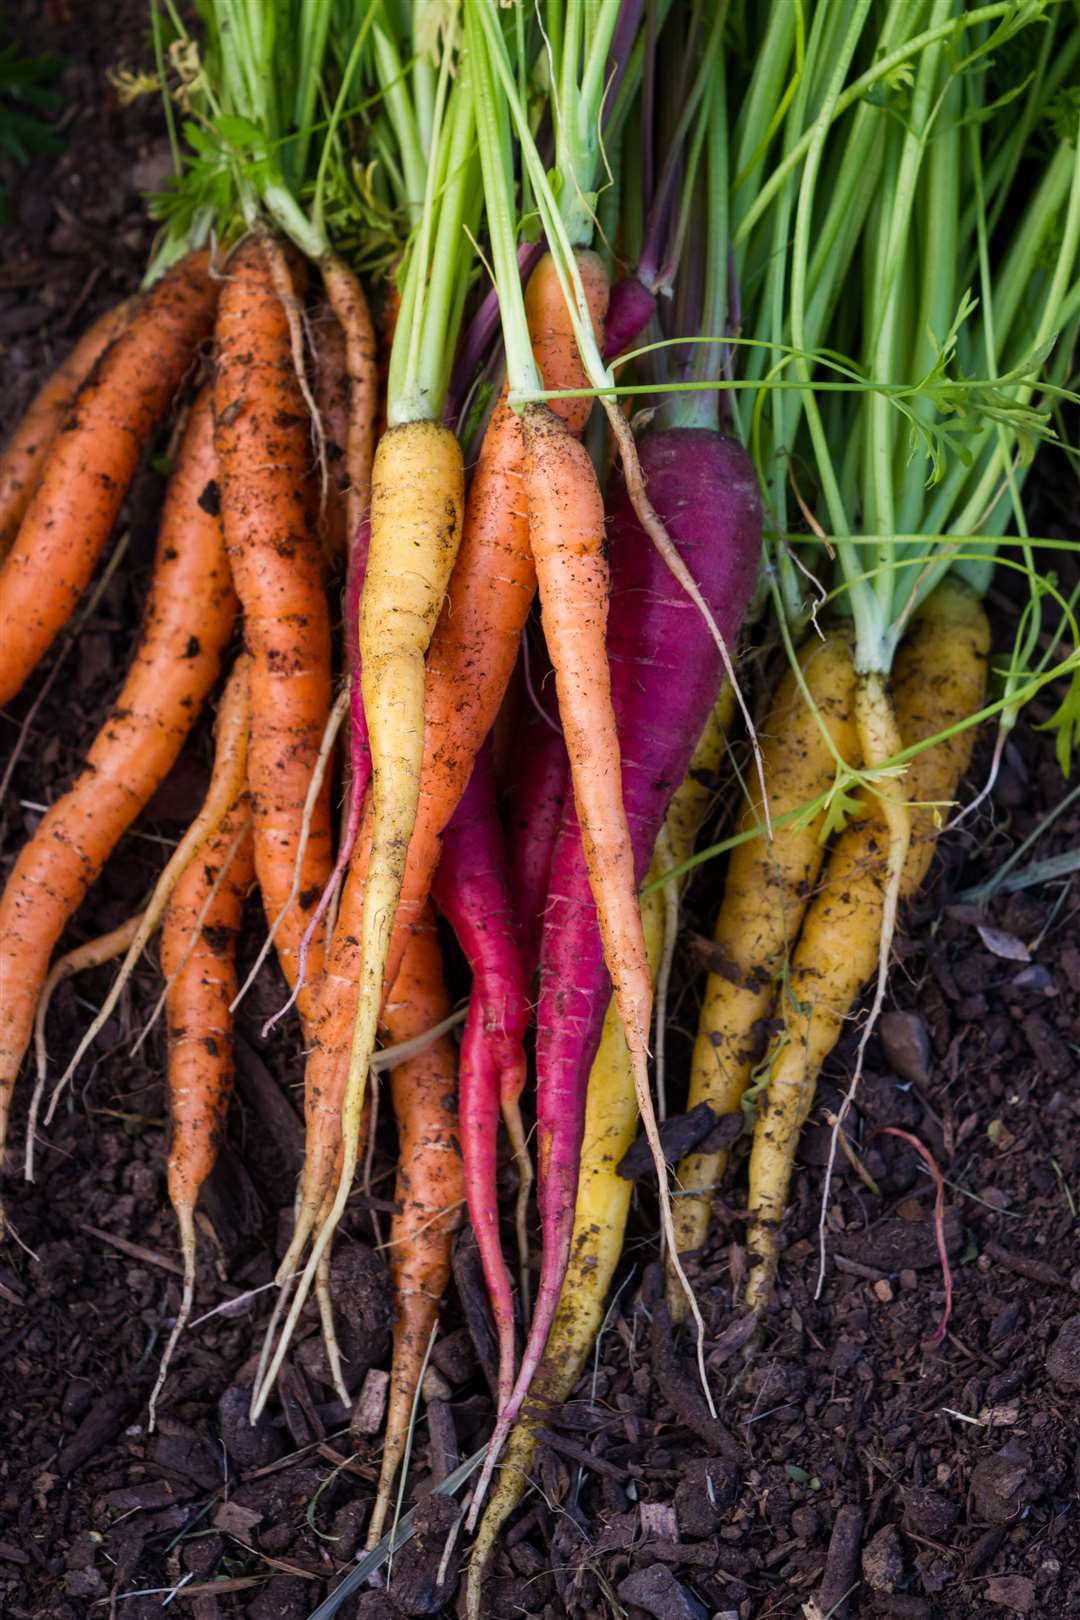 Try growing your own colourful carrots.